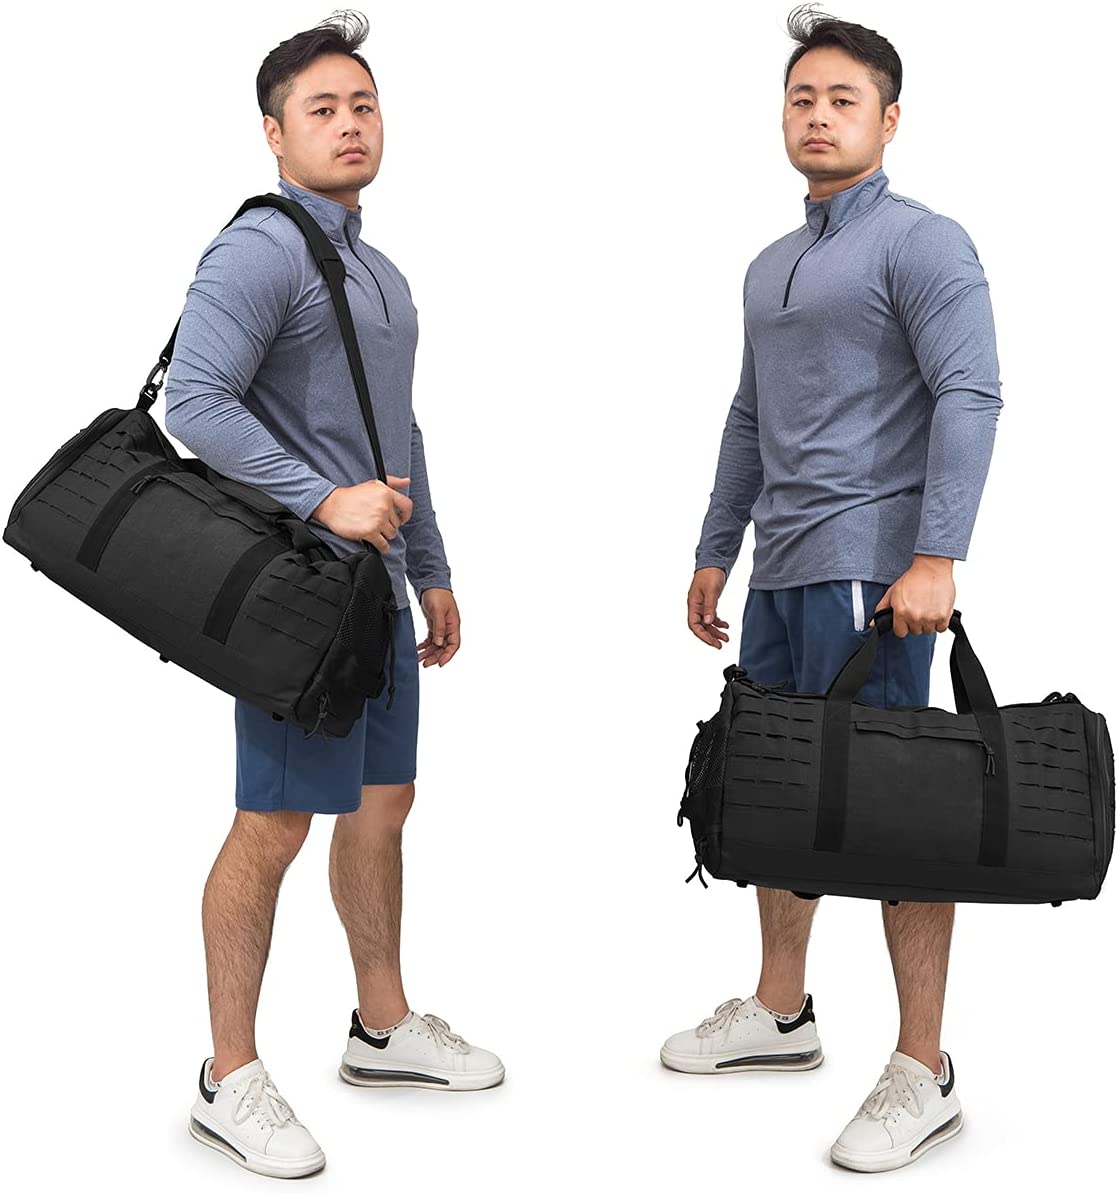 40L Military Tactical Duffle Bag For Men Sport Gym Bag Fitness Tote Travel Duffle Bag Training Workout Bag With Shoe Compartment Basketball Football Weekender Bag